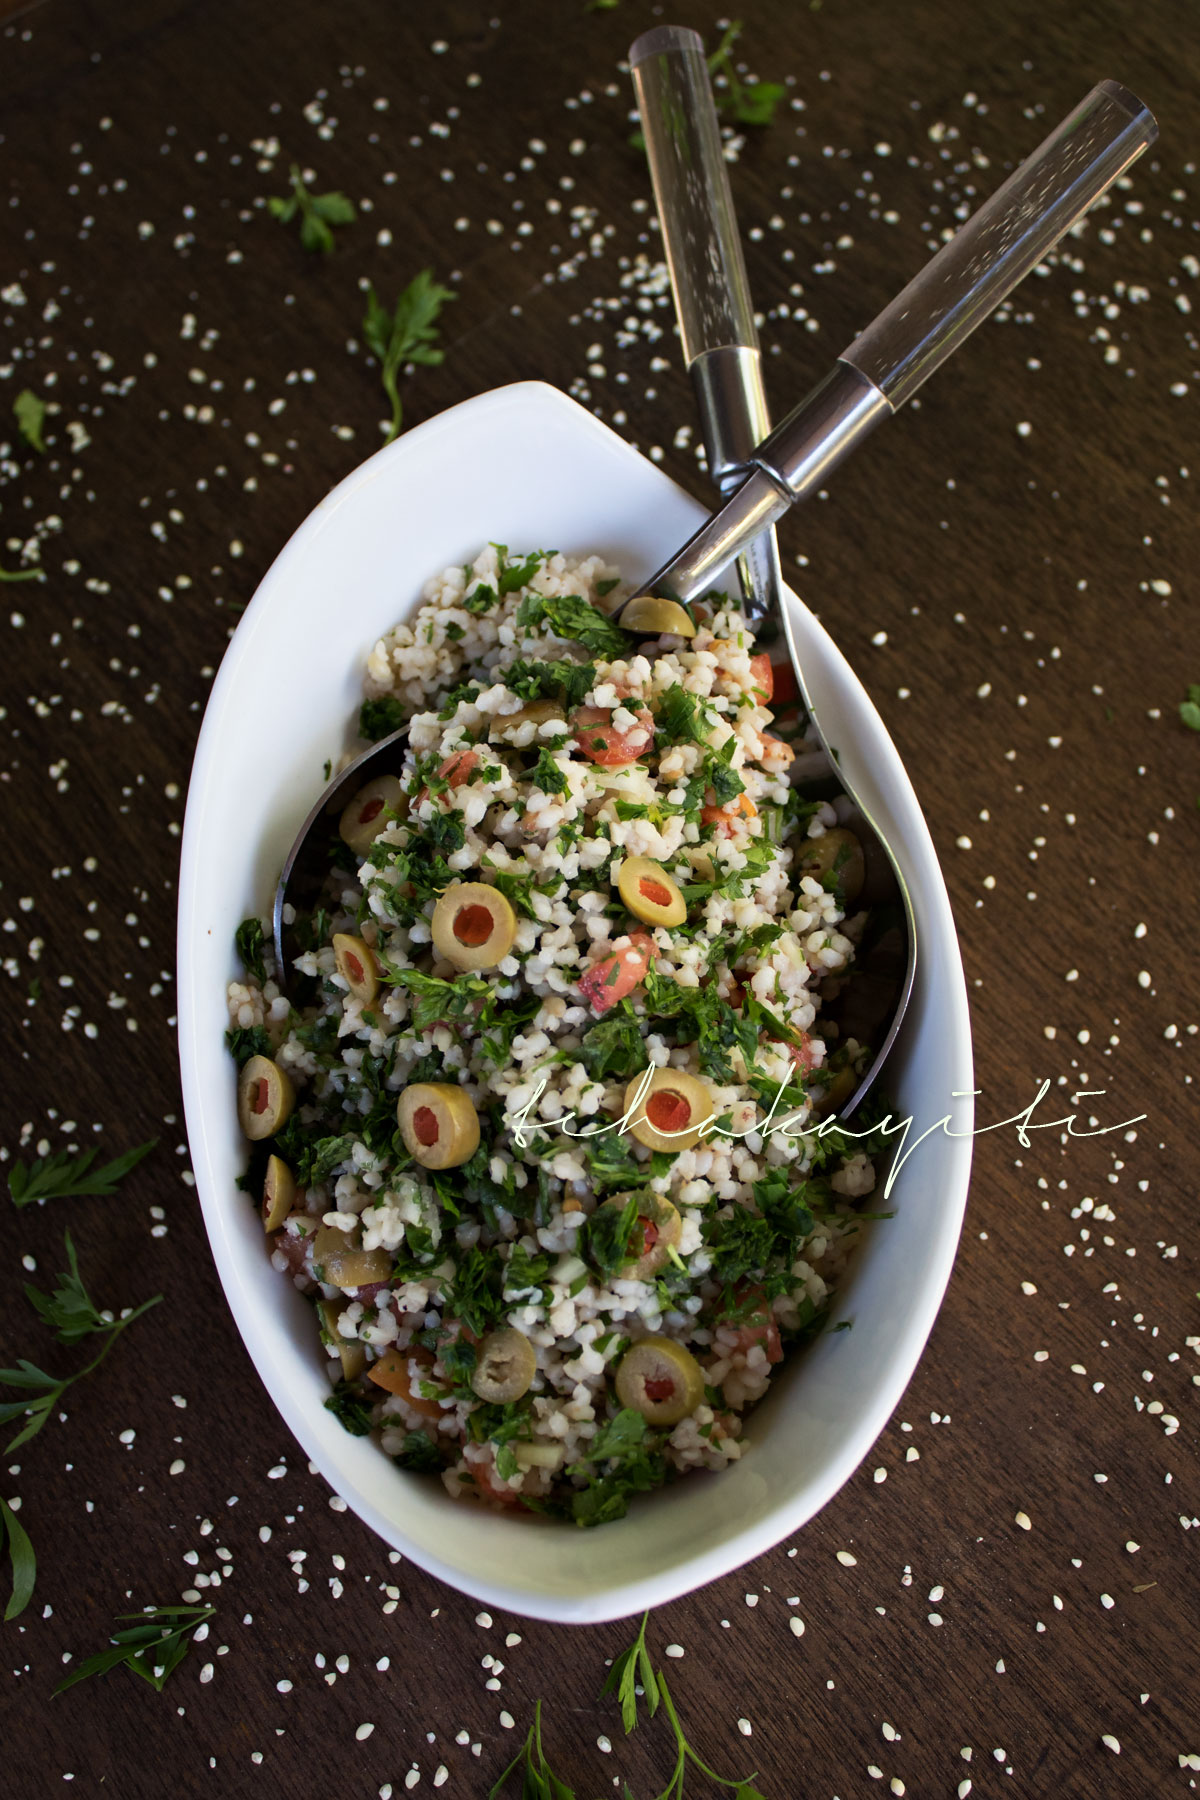 Pitimi makes a deliciously light and fluffy tabbouleh style millet salad. I encourage you to try this easy recipe. | tchakayiti.com 